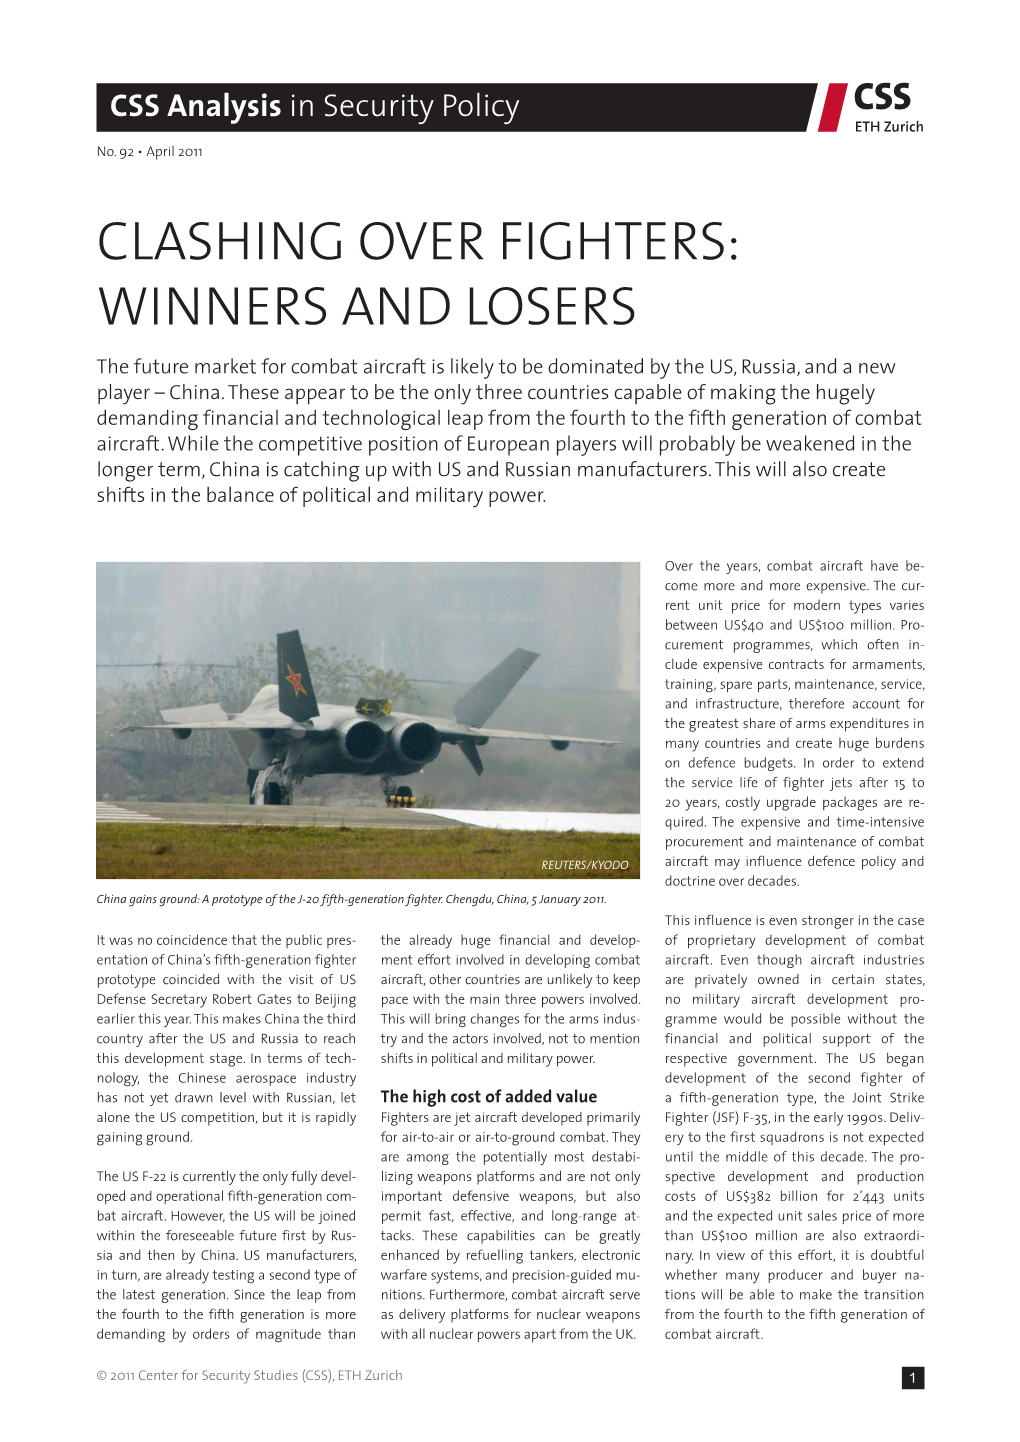 CLASHING OVER FIGHTERS: WINNERS and LOSERS the Future Market for Combat Aircraft Is Likely to Be Dominated by the US, Russia, and a New Player – China